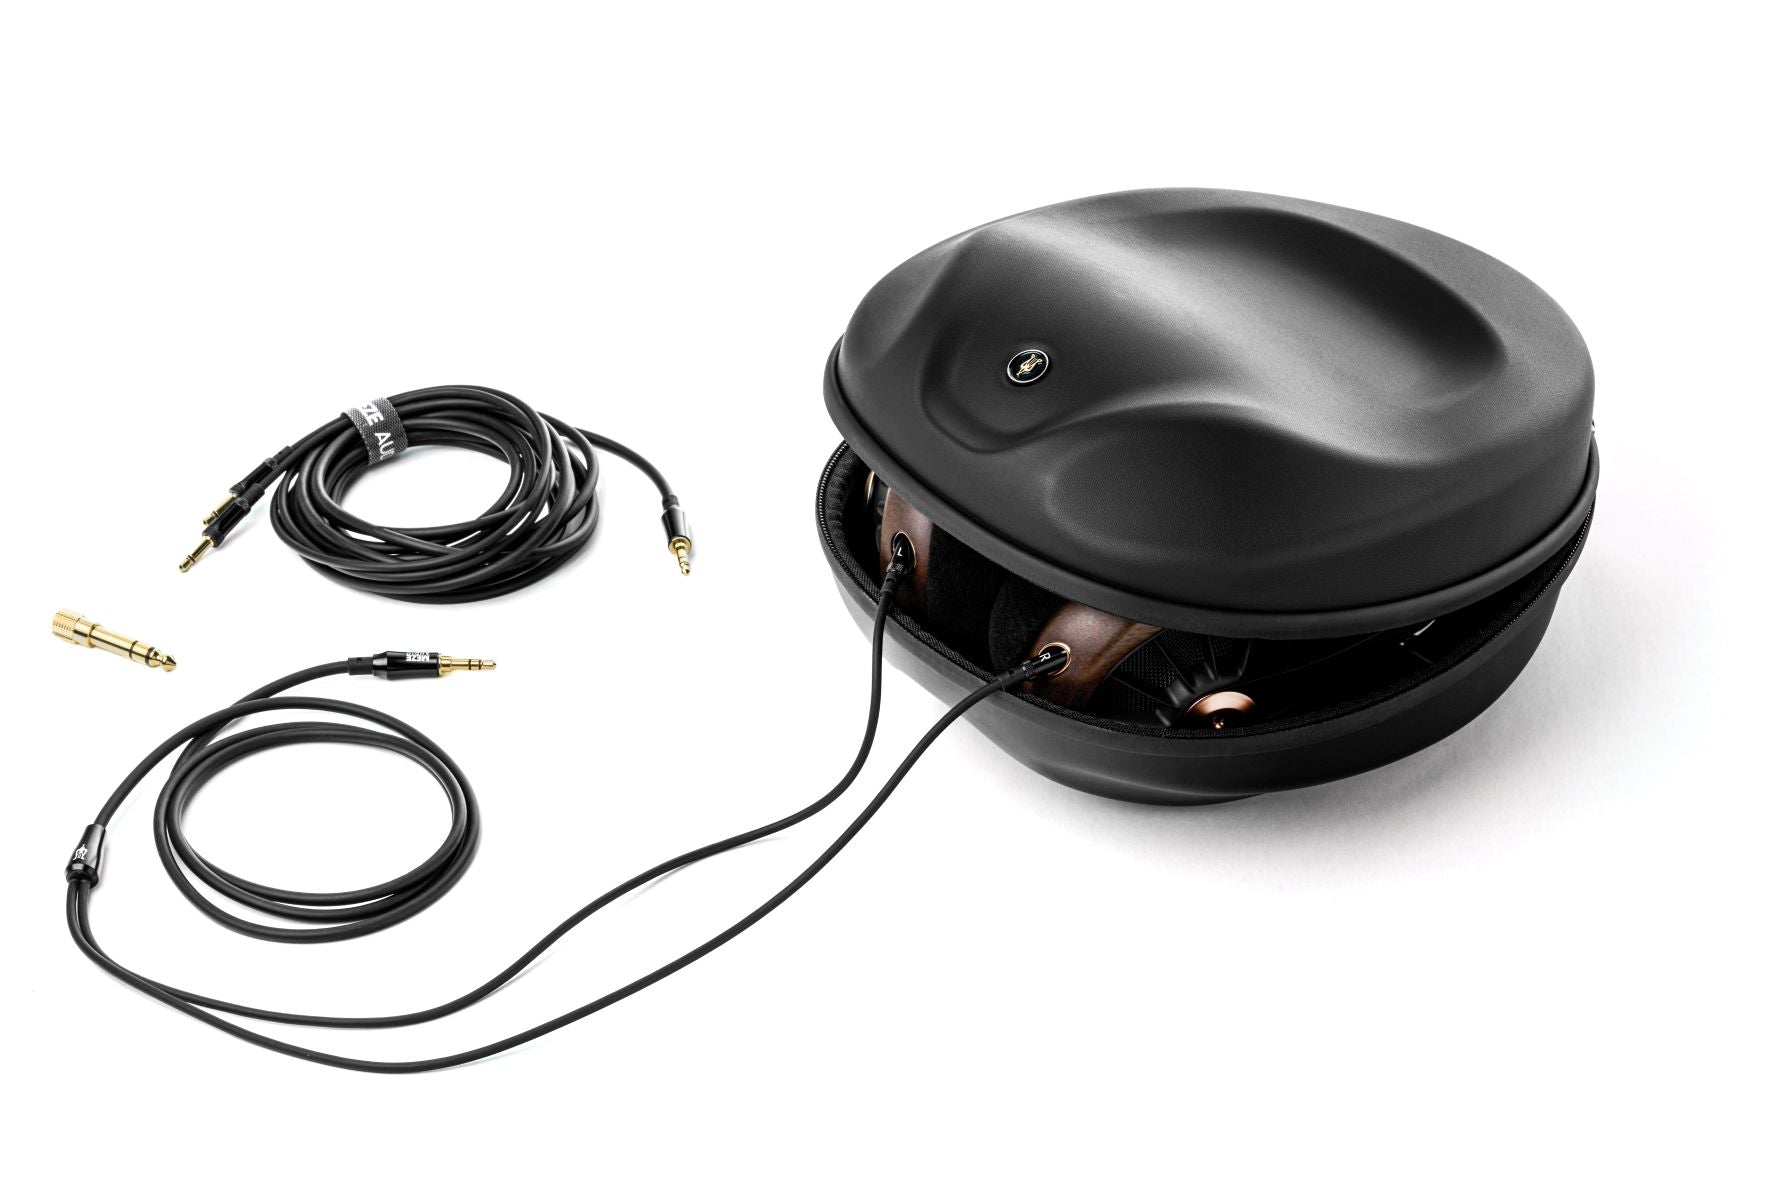 Meze audio 109 pro with hard carry case and extra cable